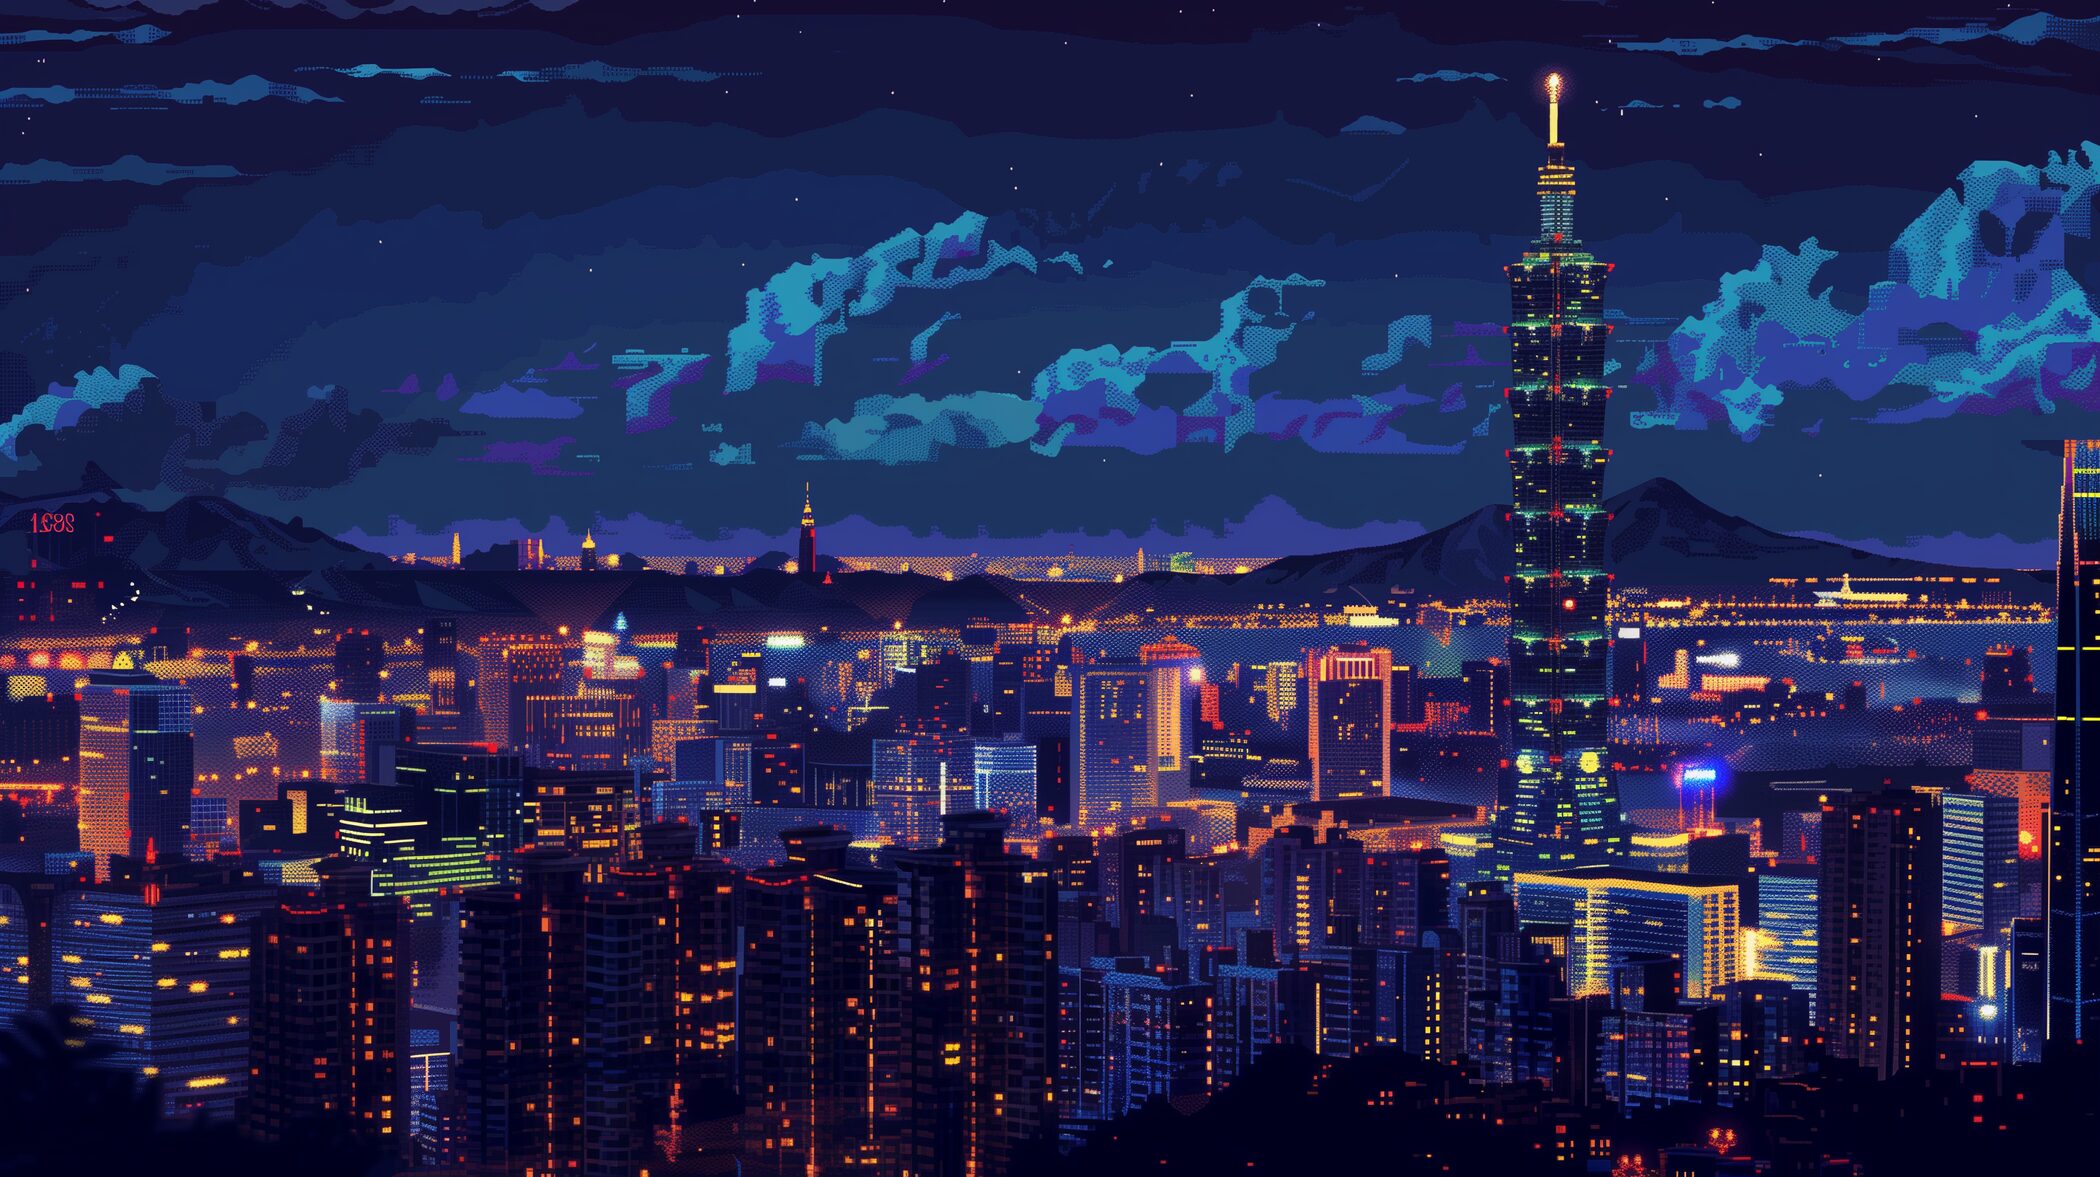 Image of the city of Taipei at night in the 8-bit art style